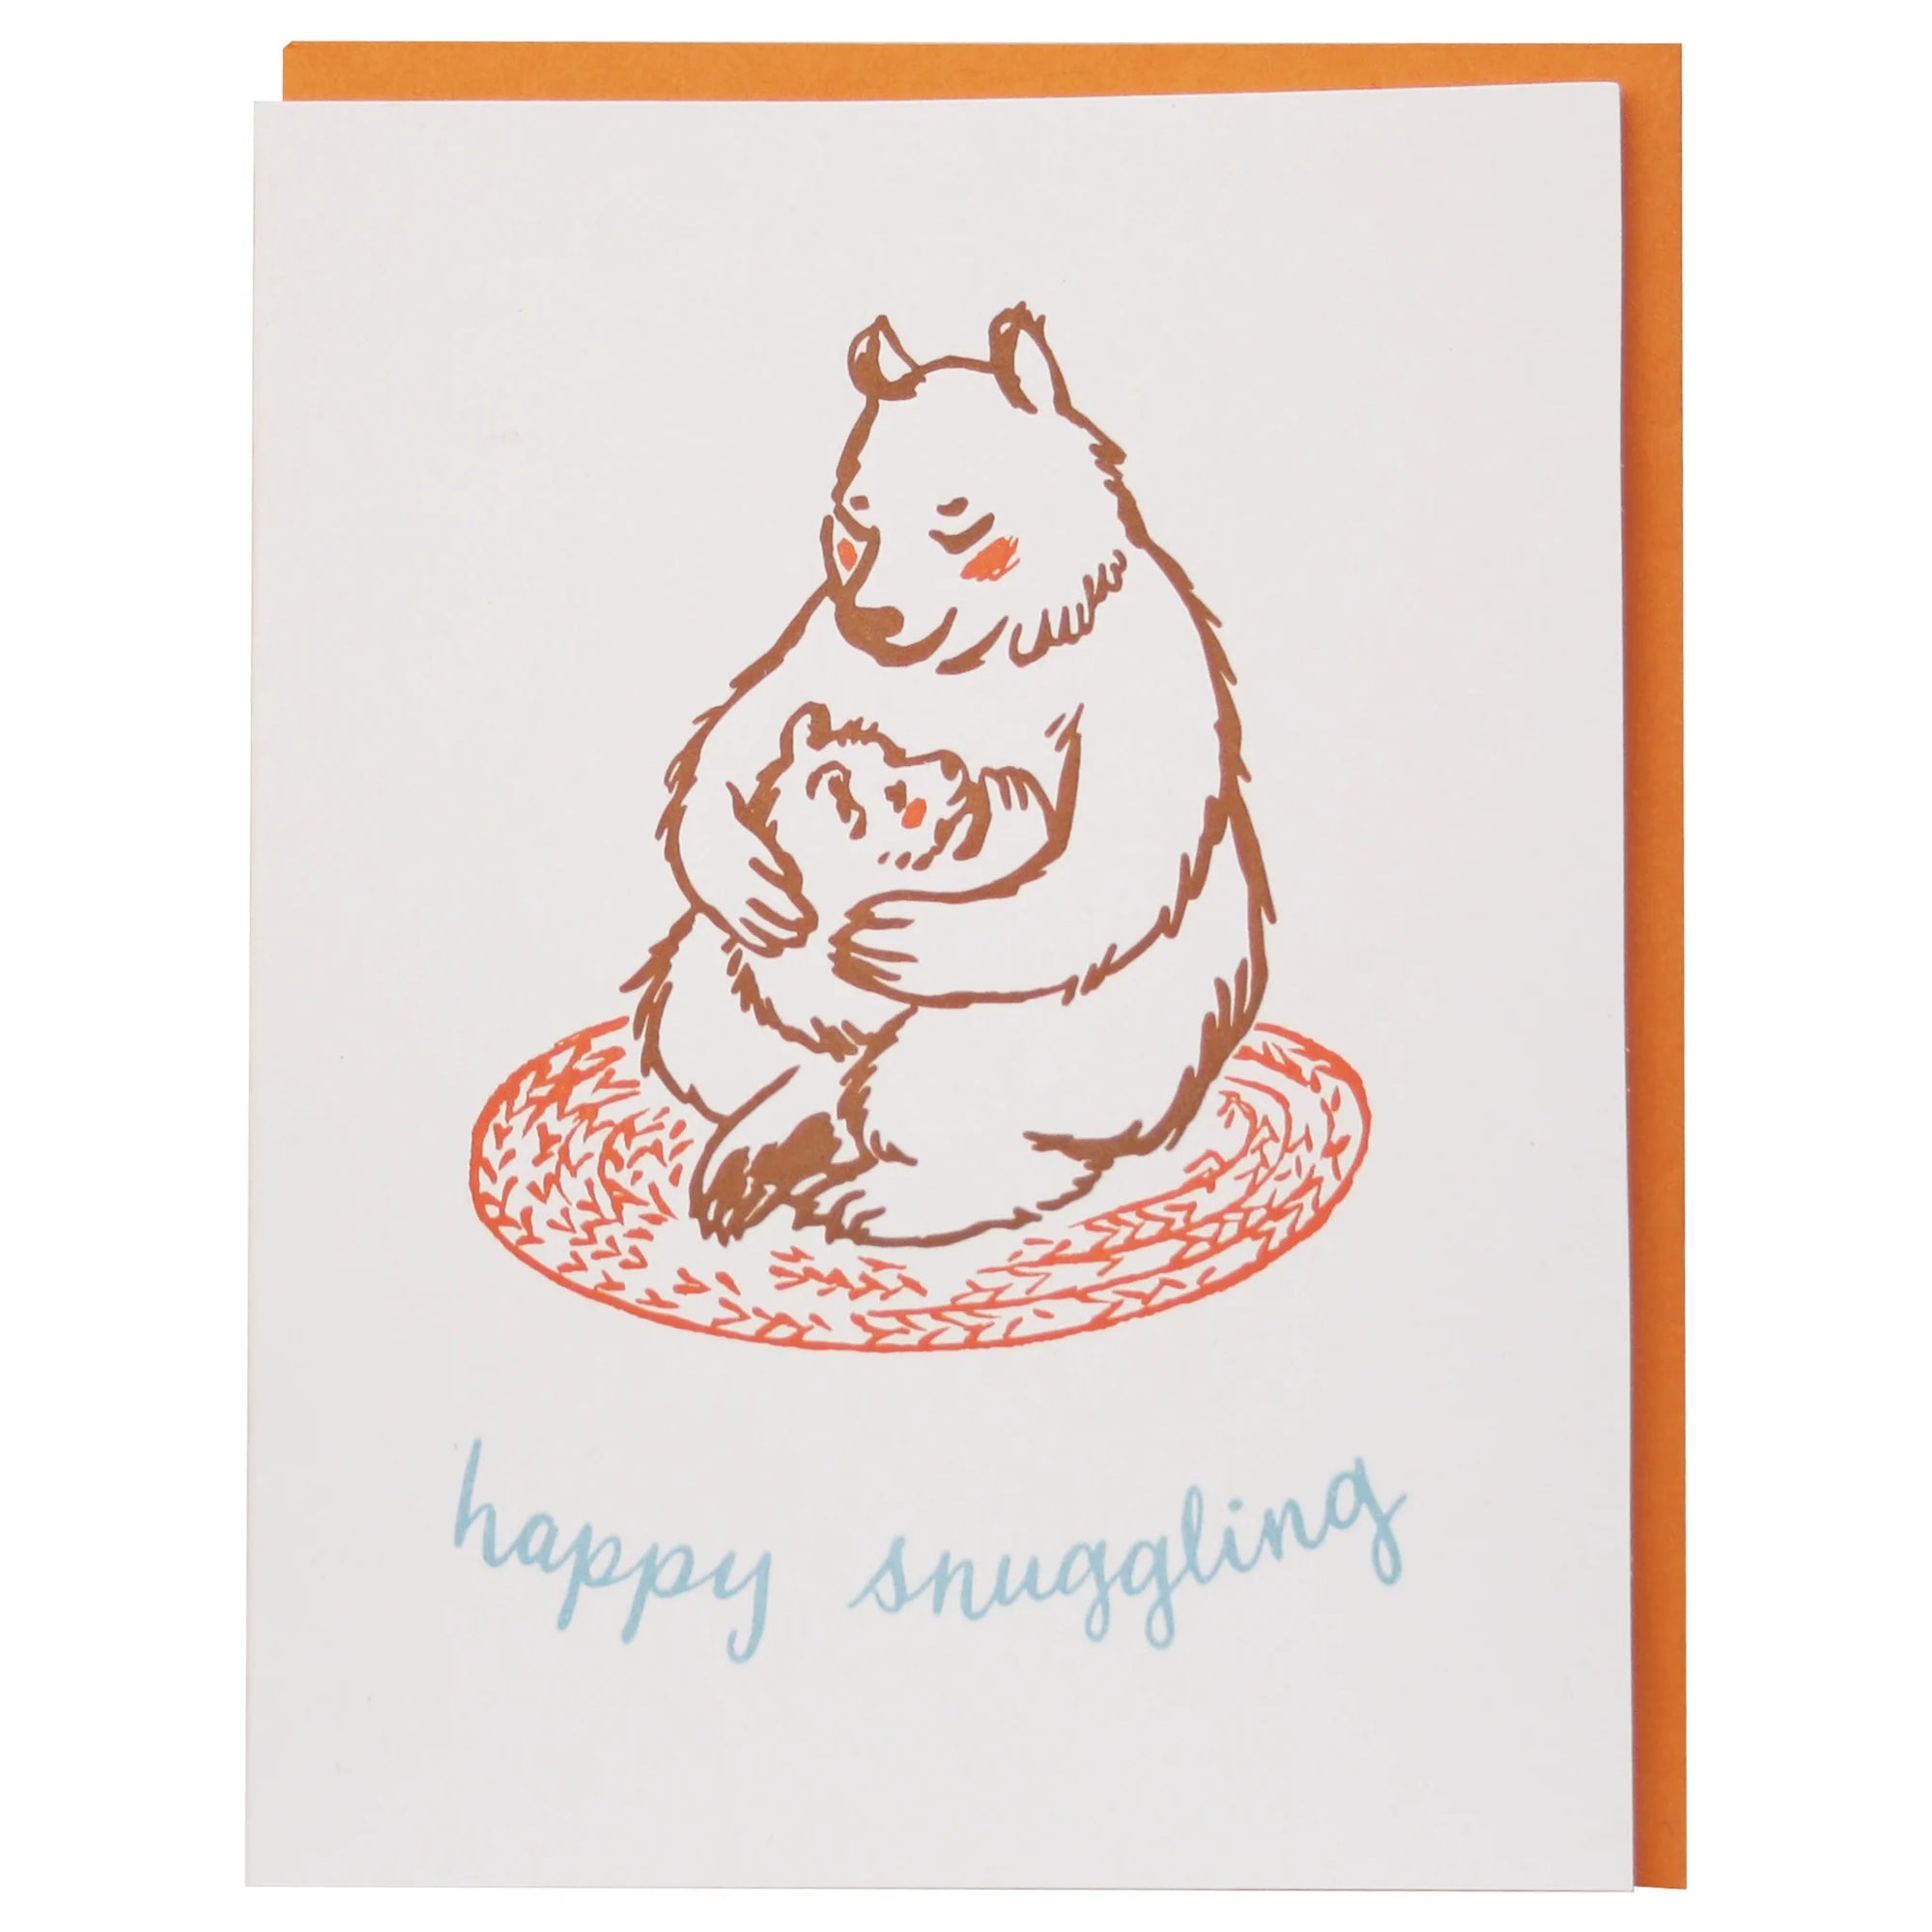 Snuggling Bears Baby Card